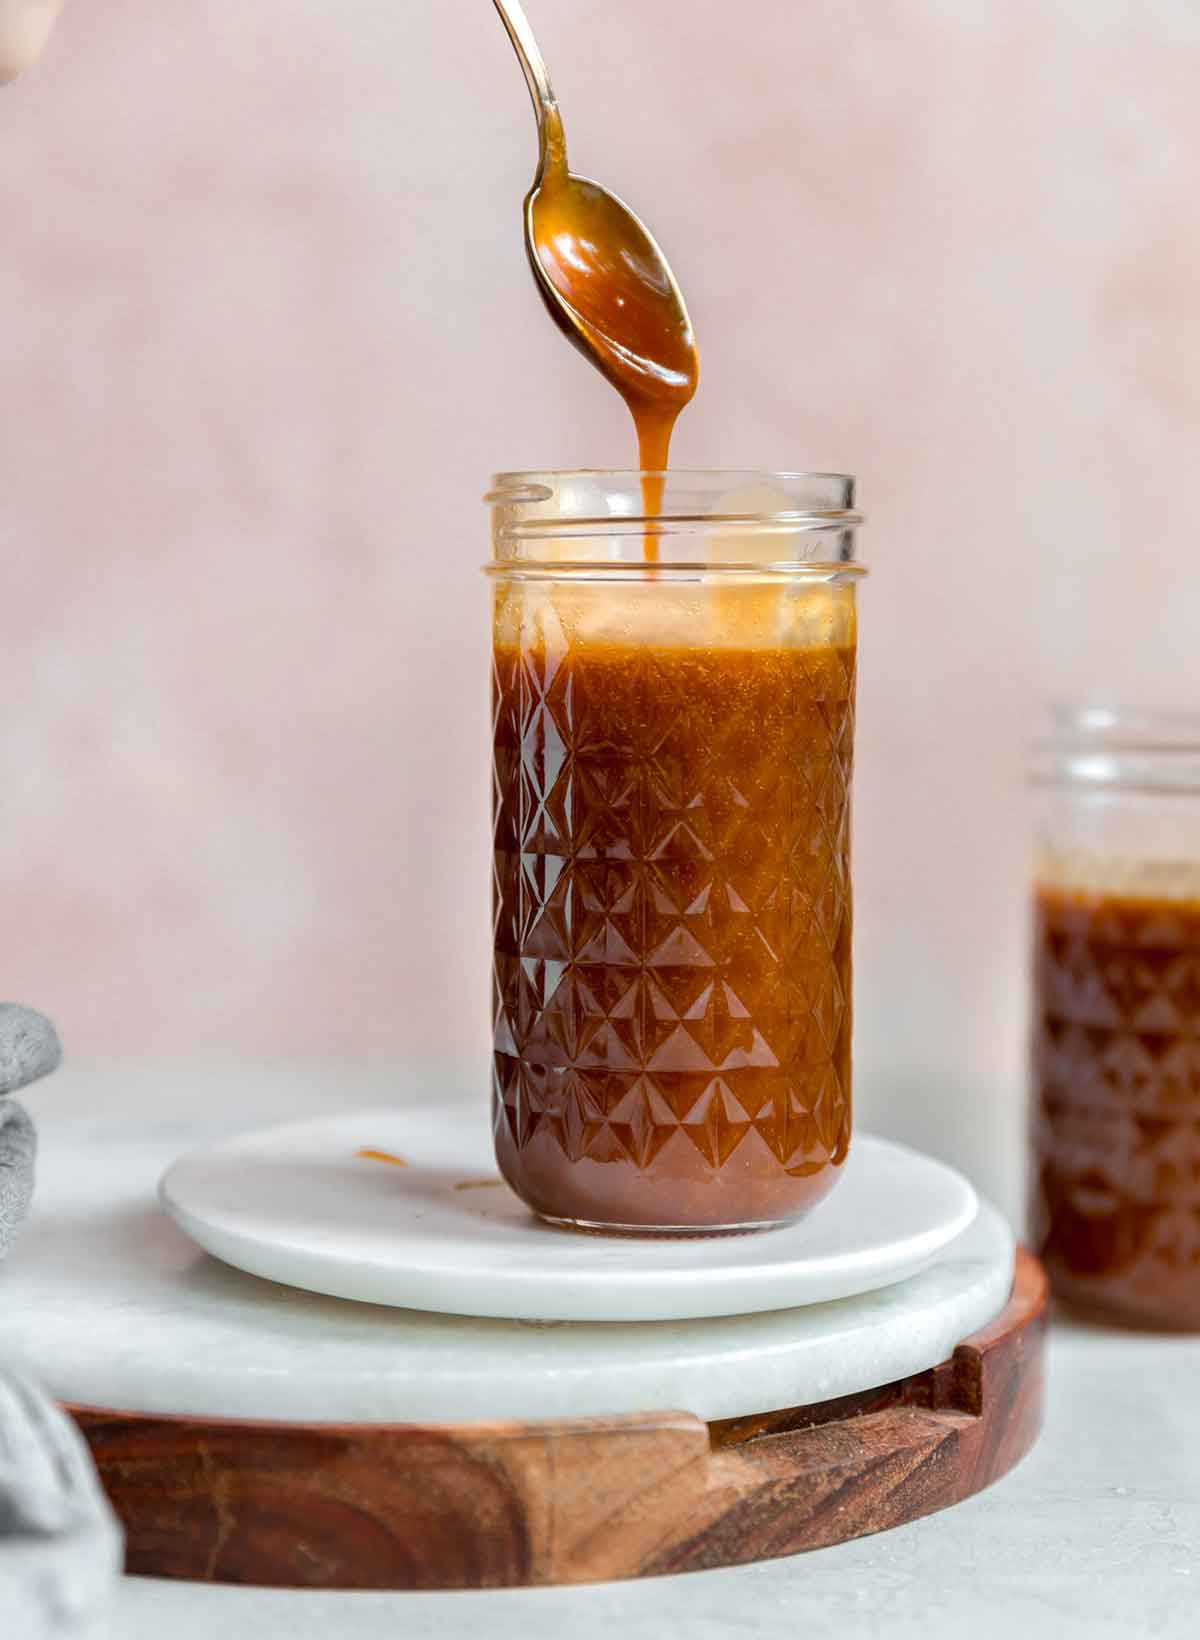 A spoon lifting salted caramel sauce out of a jar.